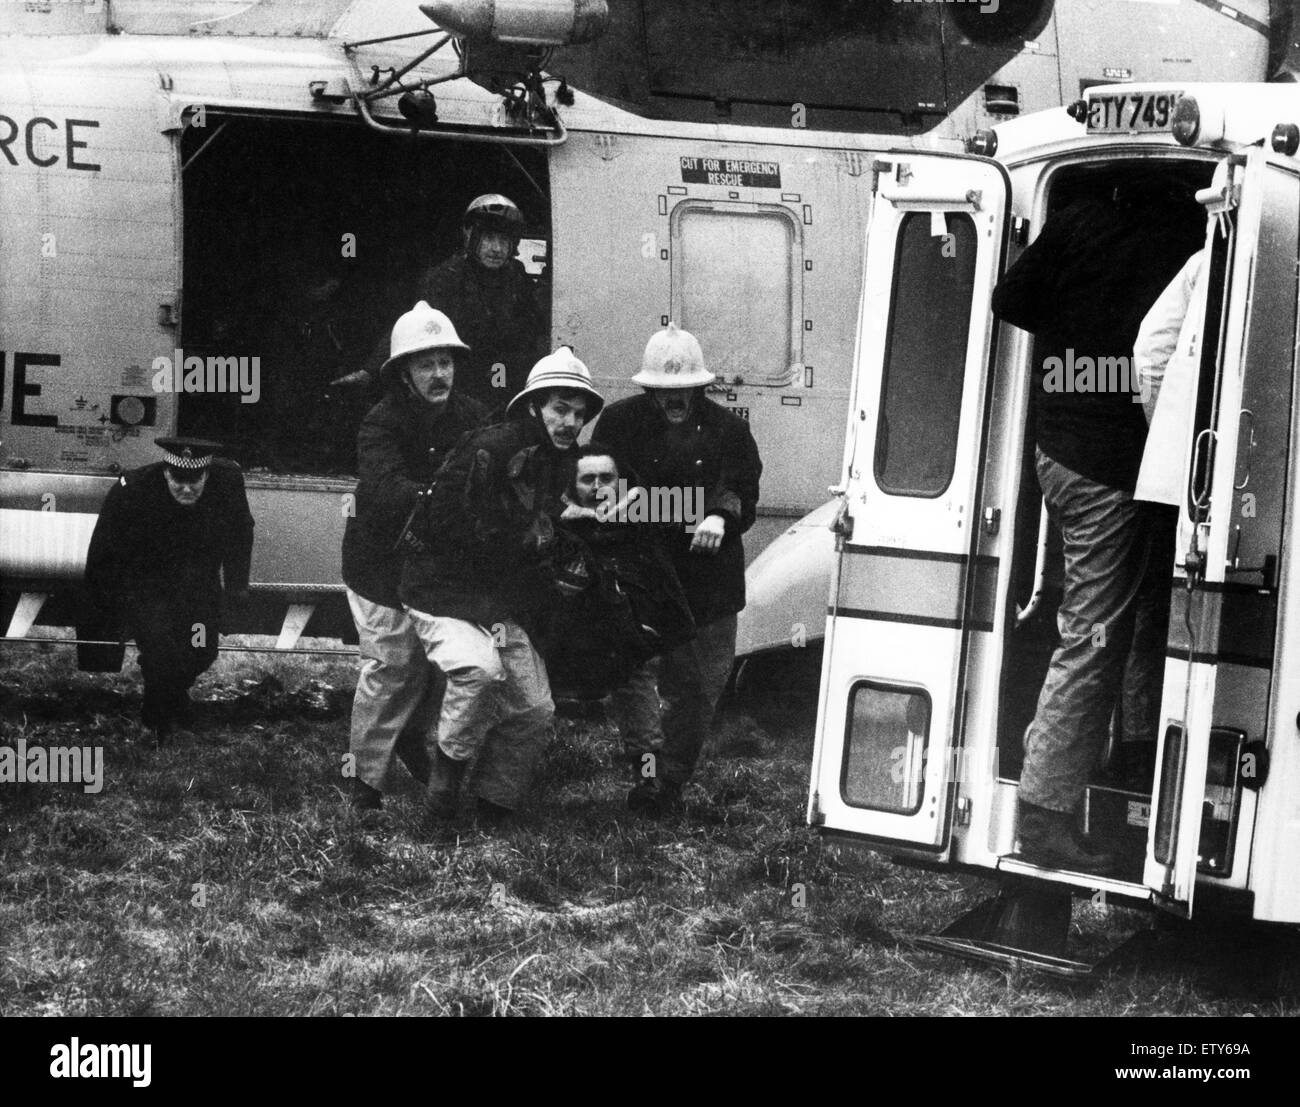 Sea rescue off Cullercoats Harbour in winds of up to Force 7. The double rescue of a fishing boat and then the inshore rescue boat. Firemen carry one of the injured men from the Sea King Helicopter. 22nd February 1981. Stock Photo